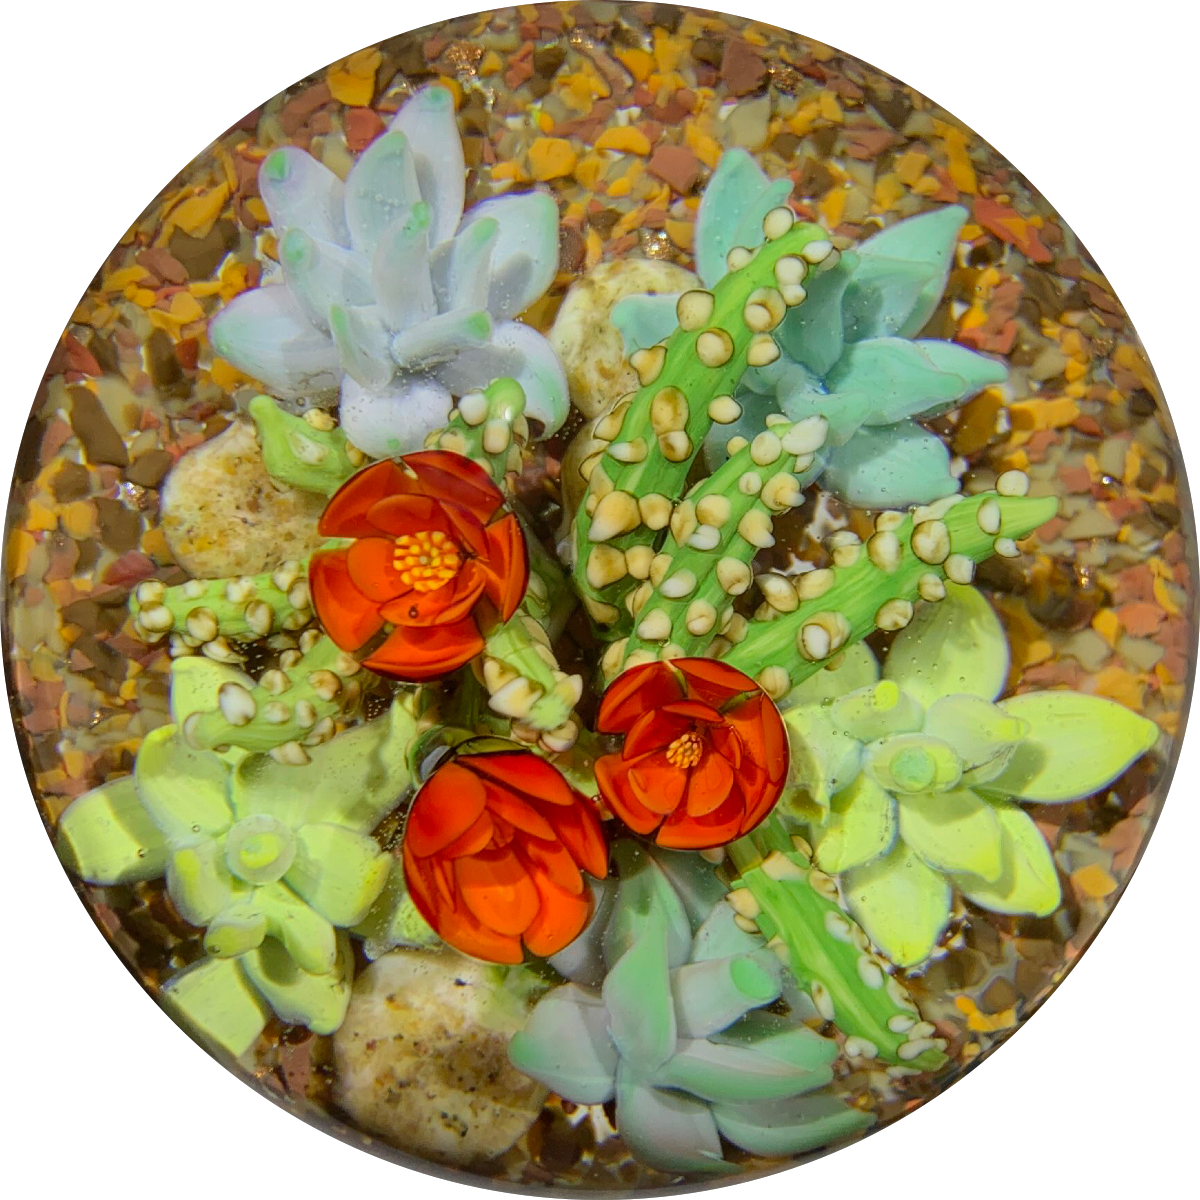 Cathy Richardson 2020 One-Of-A-Kind Miniature Flamework Flowering Cacti & Succulents